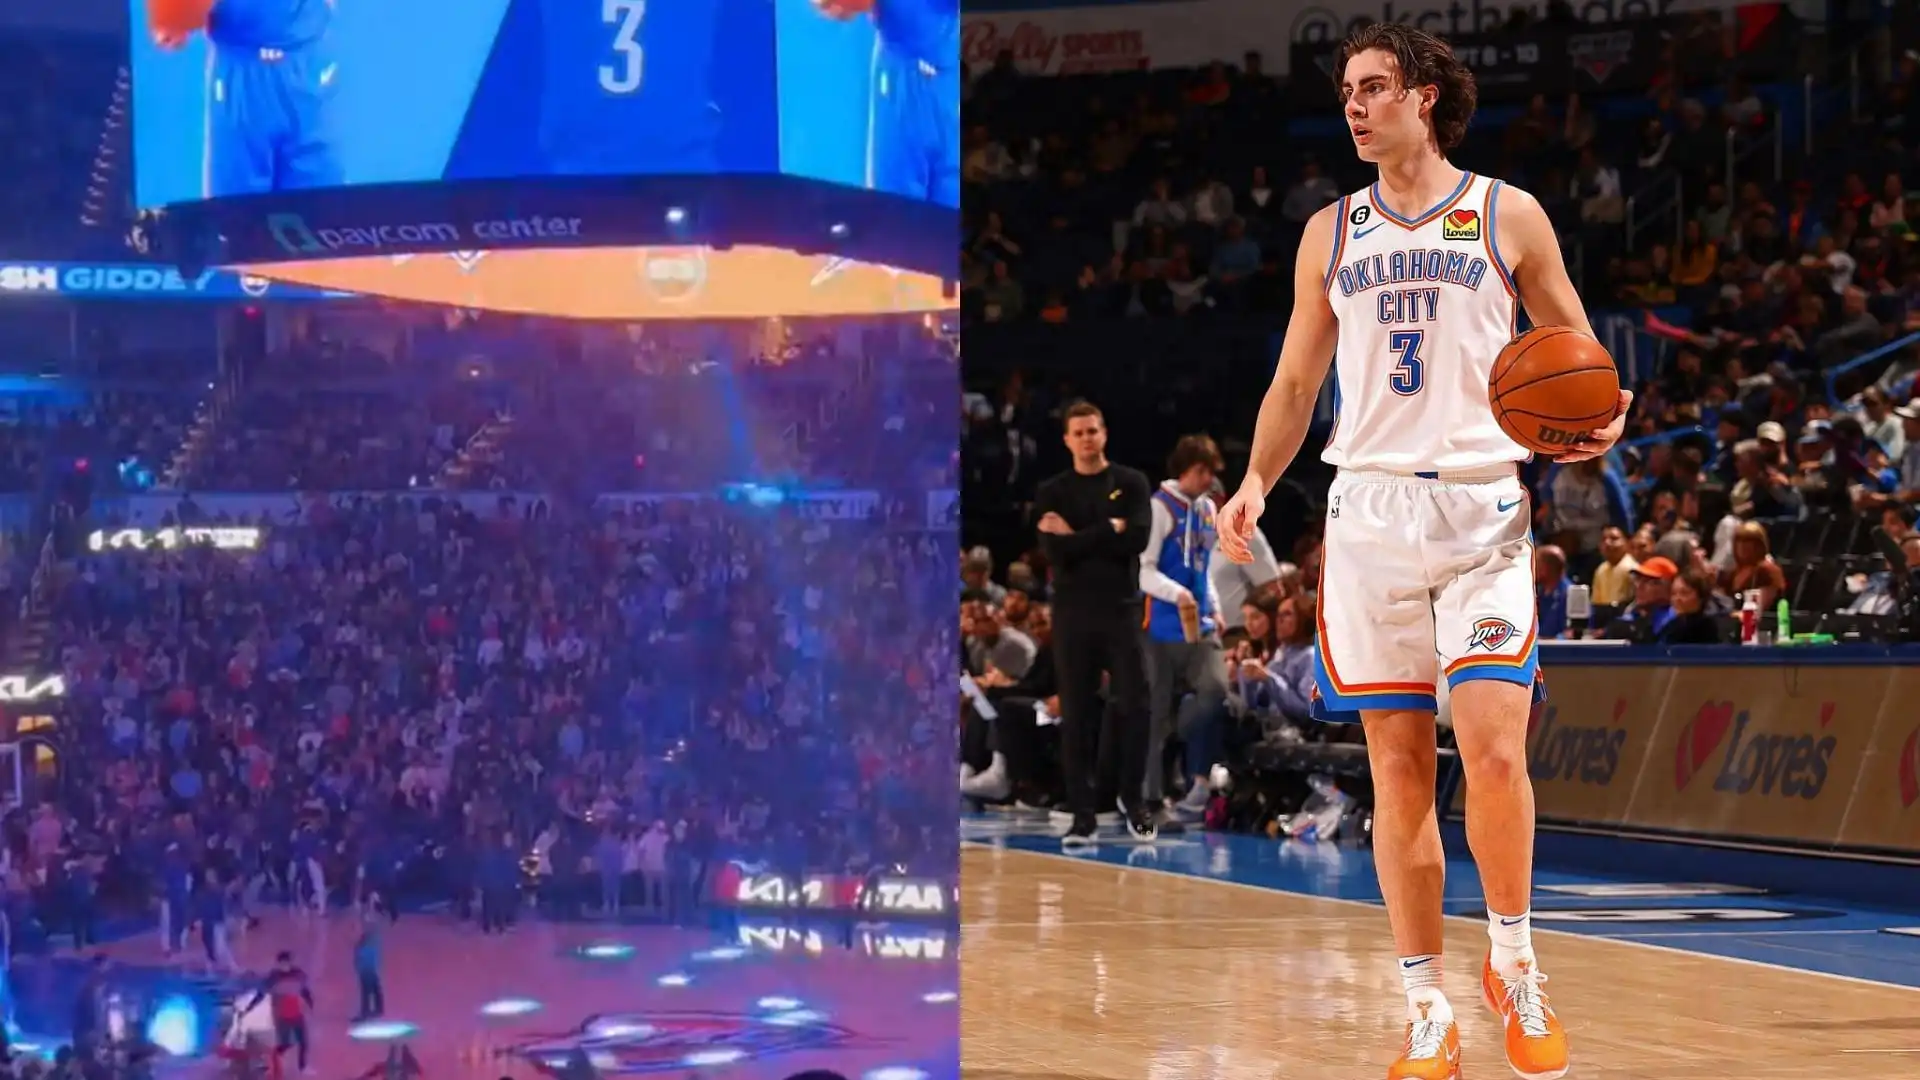 Josh Giddey receives huge cheer from OKC Thunder crowd during introduction amid recent scandal